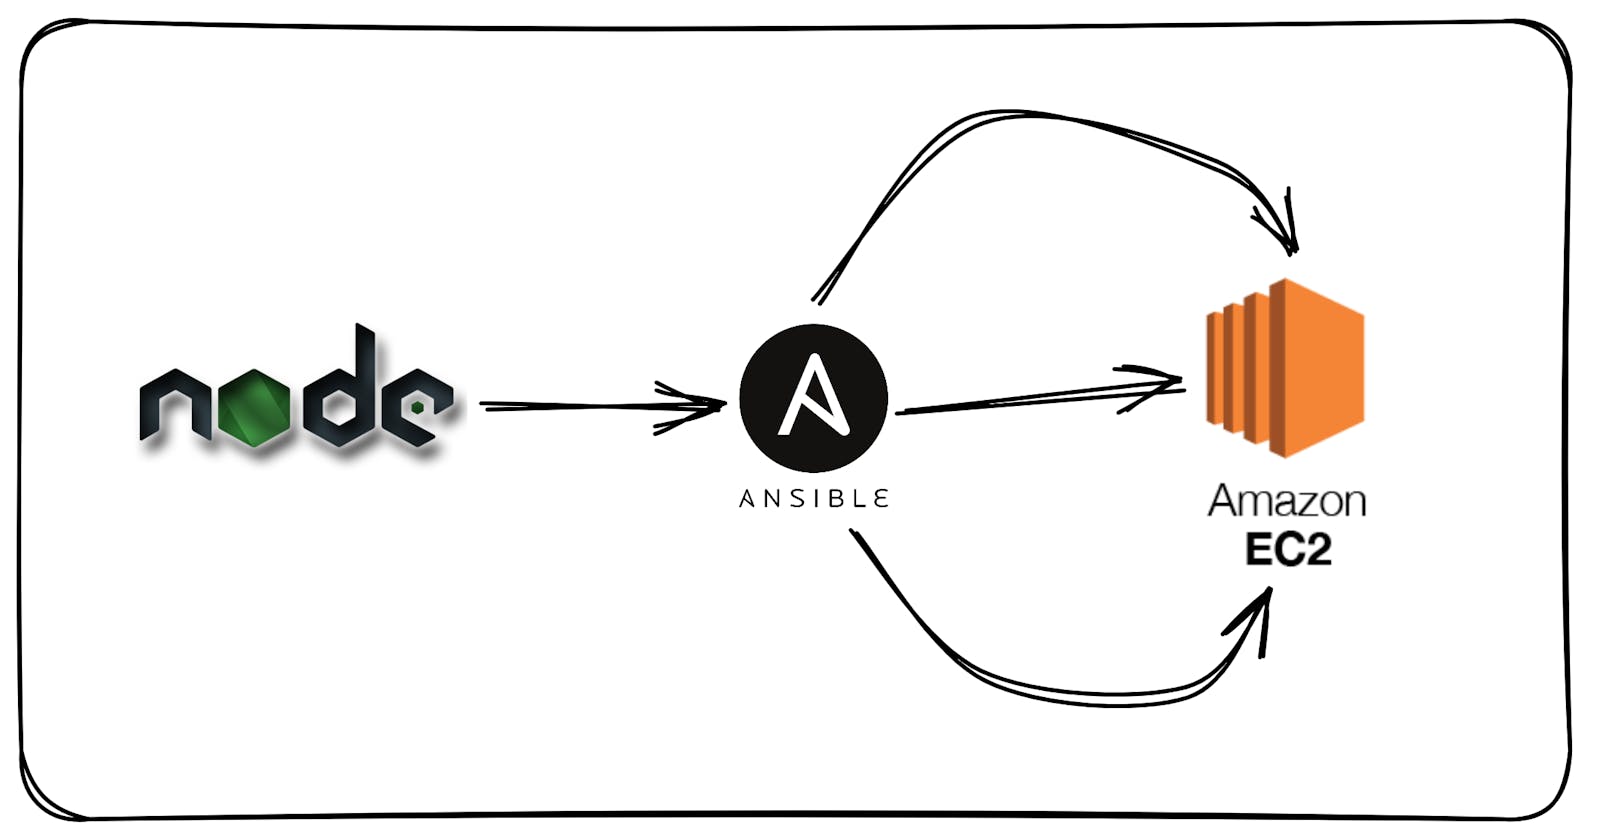 Your 1st Ansible Project - Node-App-Deploy